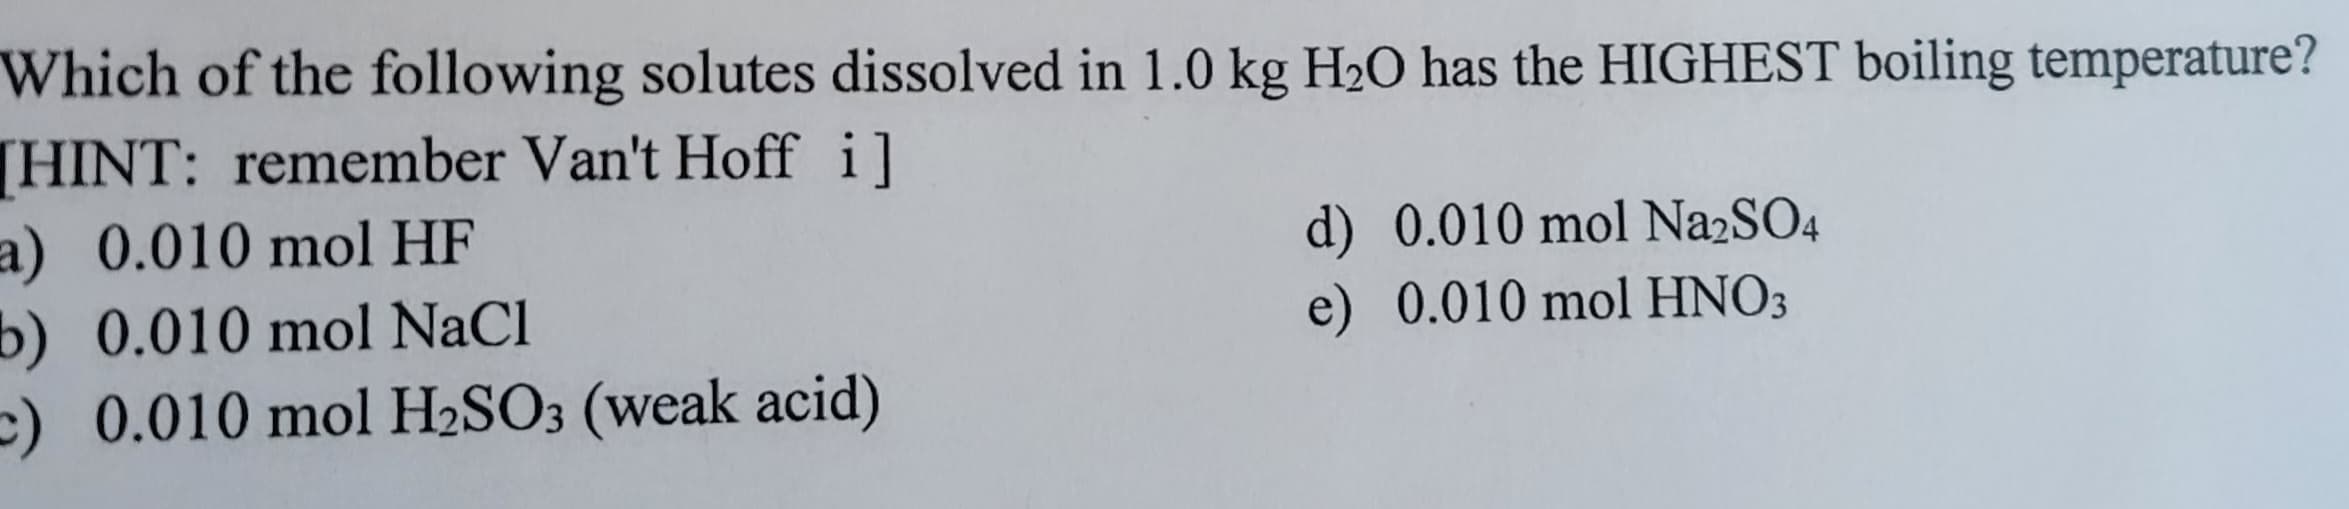 Which of the following solutes dissolved in 1.0 kg H₂O has the HIGHEST boiling temperature?
[HINT: remember Van't Hoff i]
a) 0.010 mol HF
b) 0.010 mol NaCl
c) 0.010 mol H₂SO3 (weak acid)
d) 0.010 mol Na2SO4
e) 0.010 mol HNO3